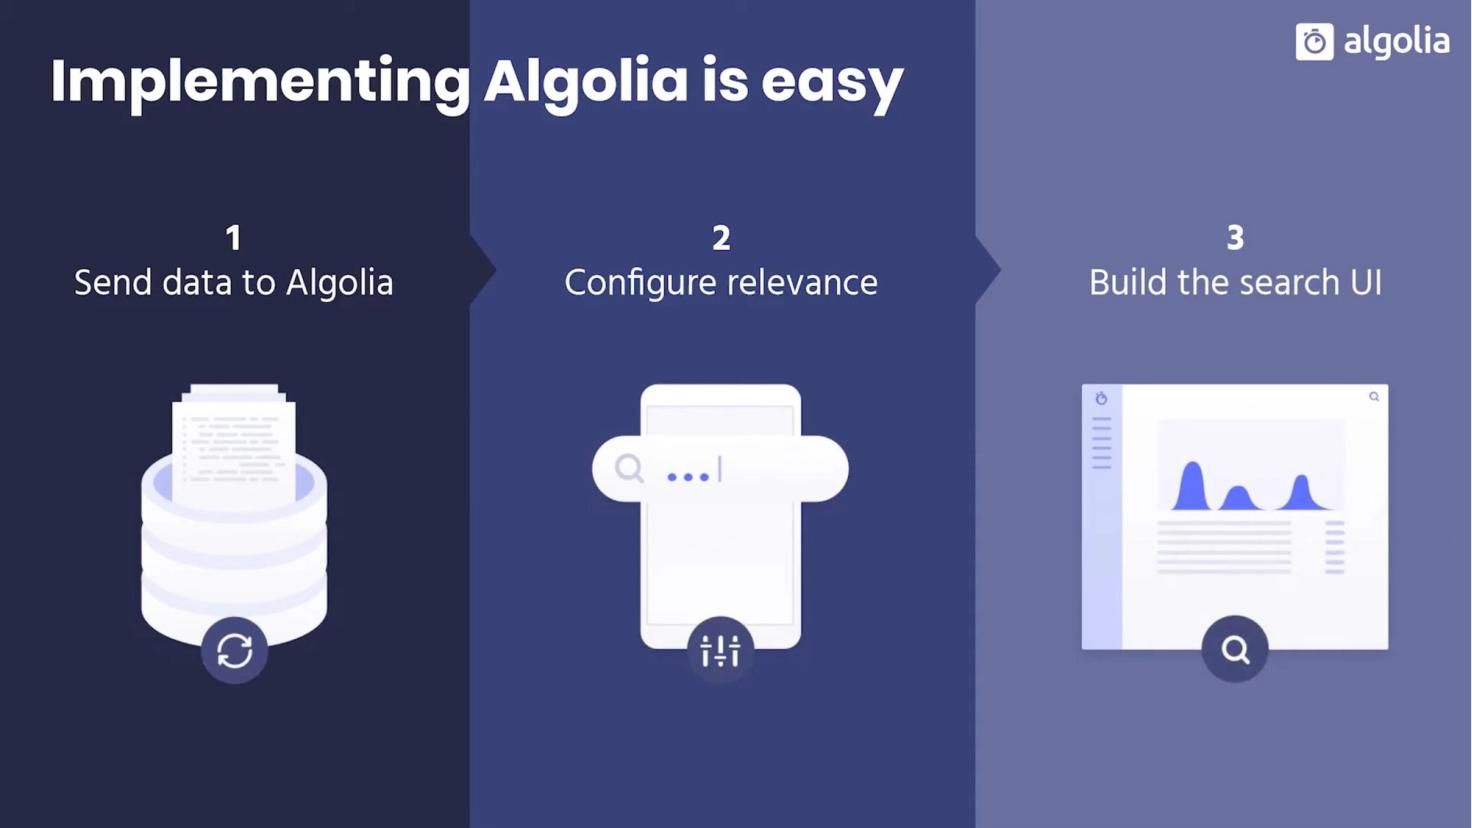 Implementing Algolia is easy. Step 1: Send data to Algolia. Step 2: Configure relevance. Step 3: Build the search user interface